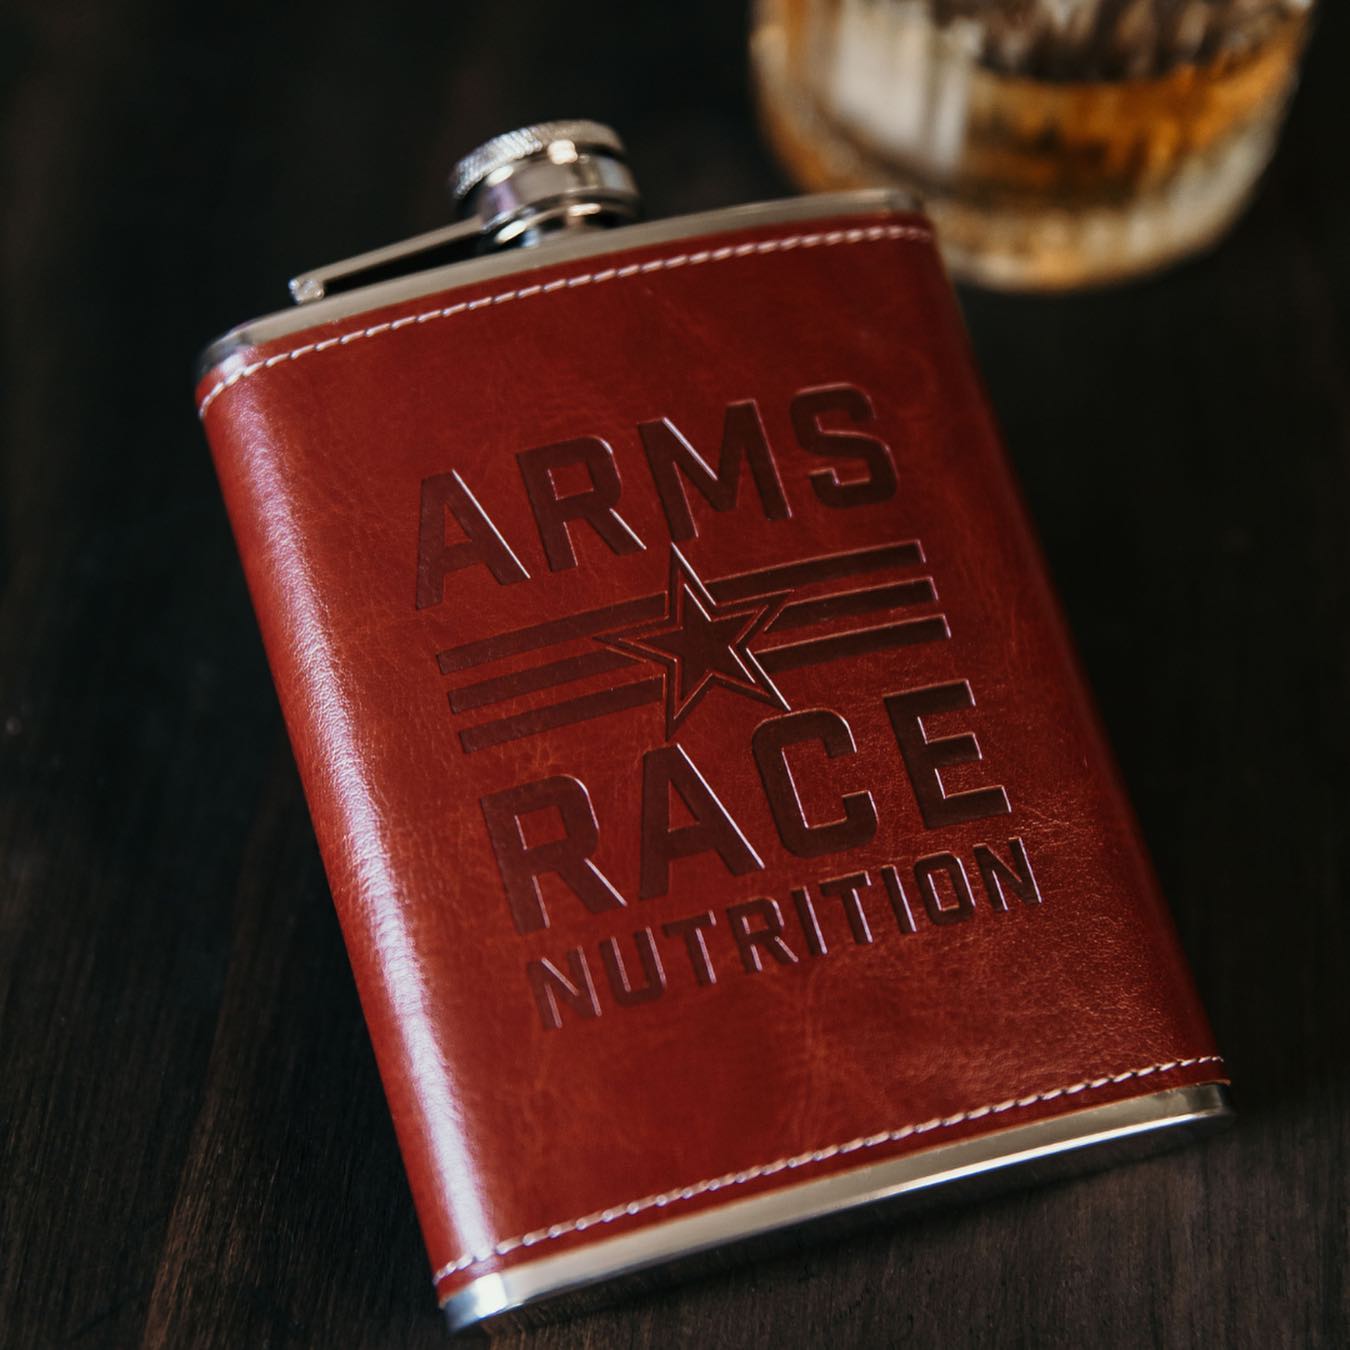 Arms Race Nutrition Stainless Steel Flask